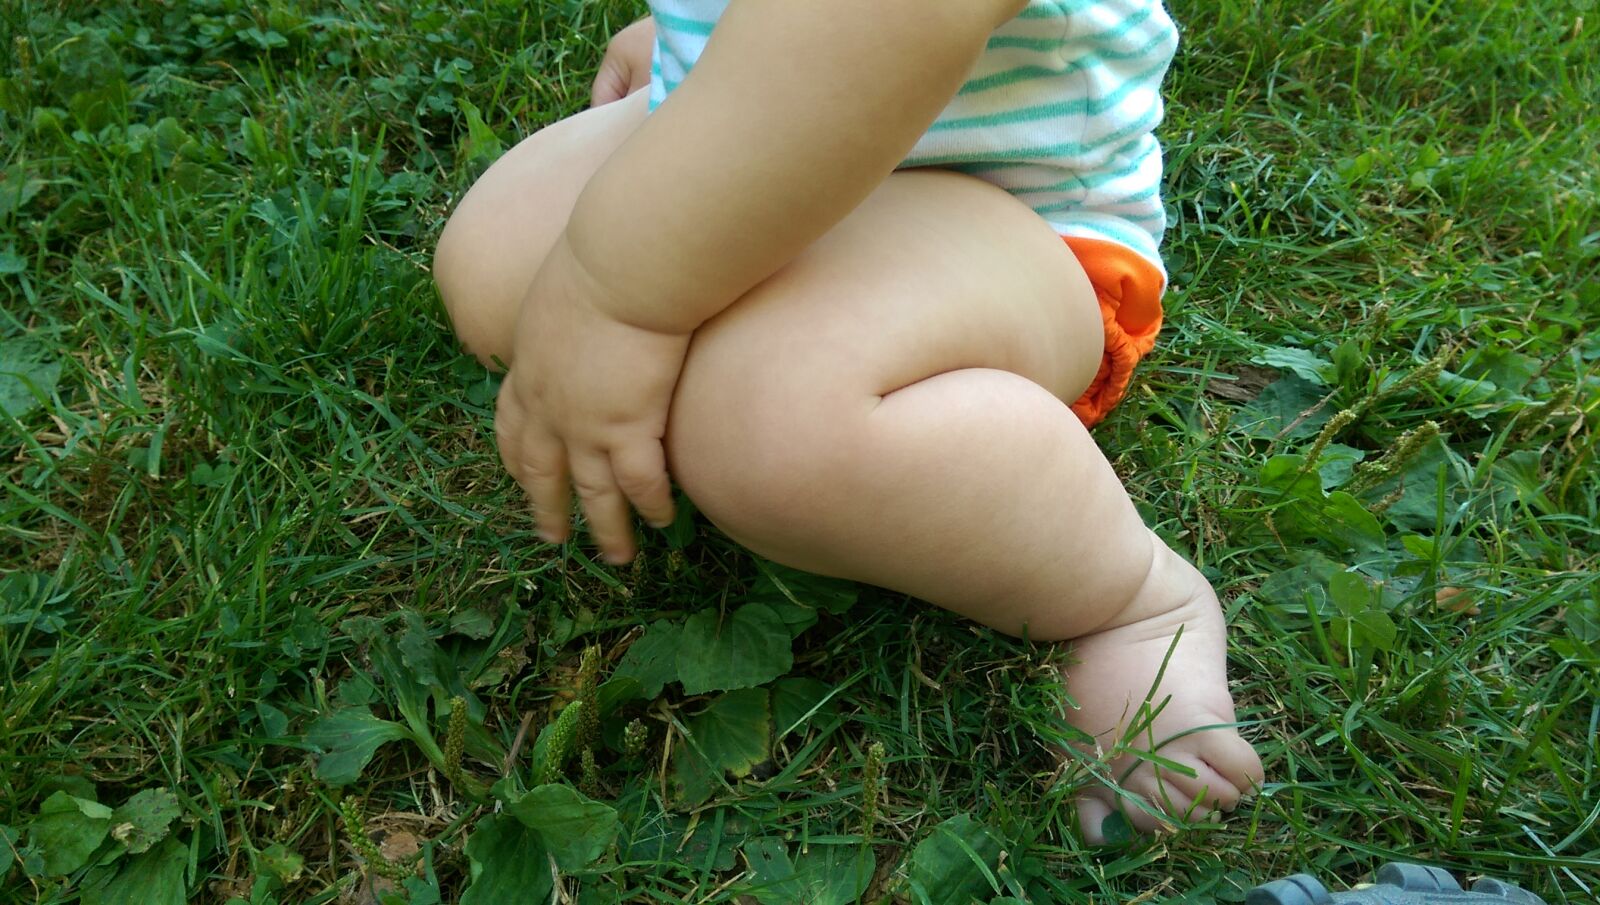 HTC ONE M8 sample photo. Baby, grass, legs, summer photography